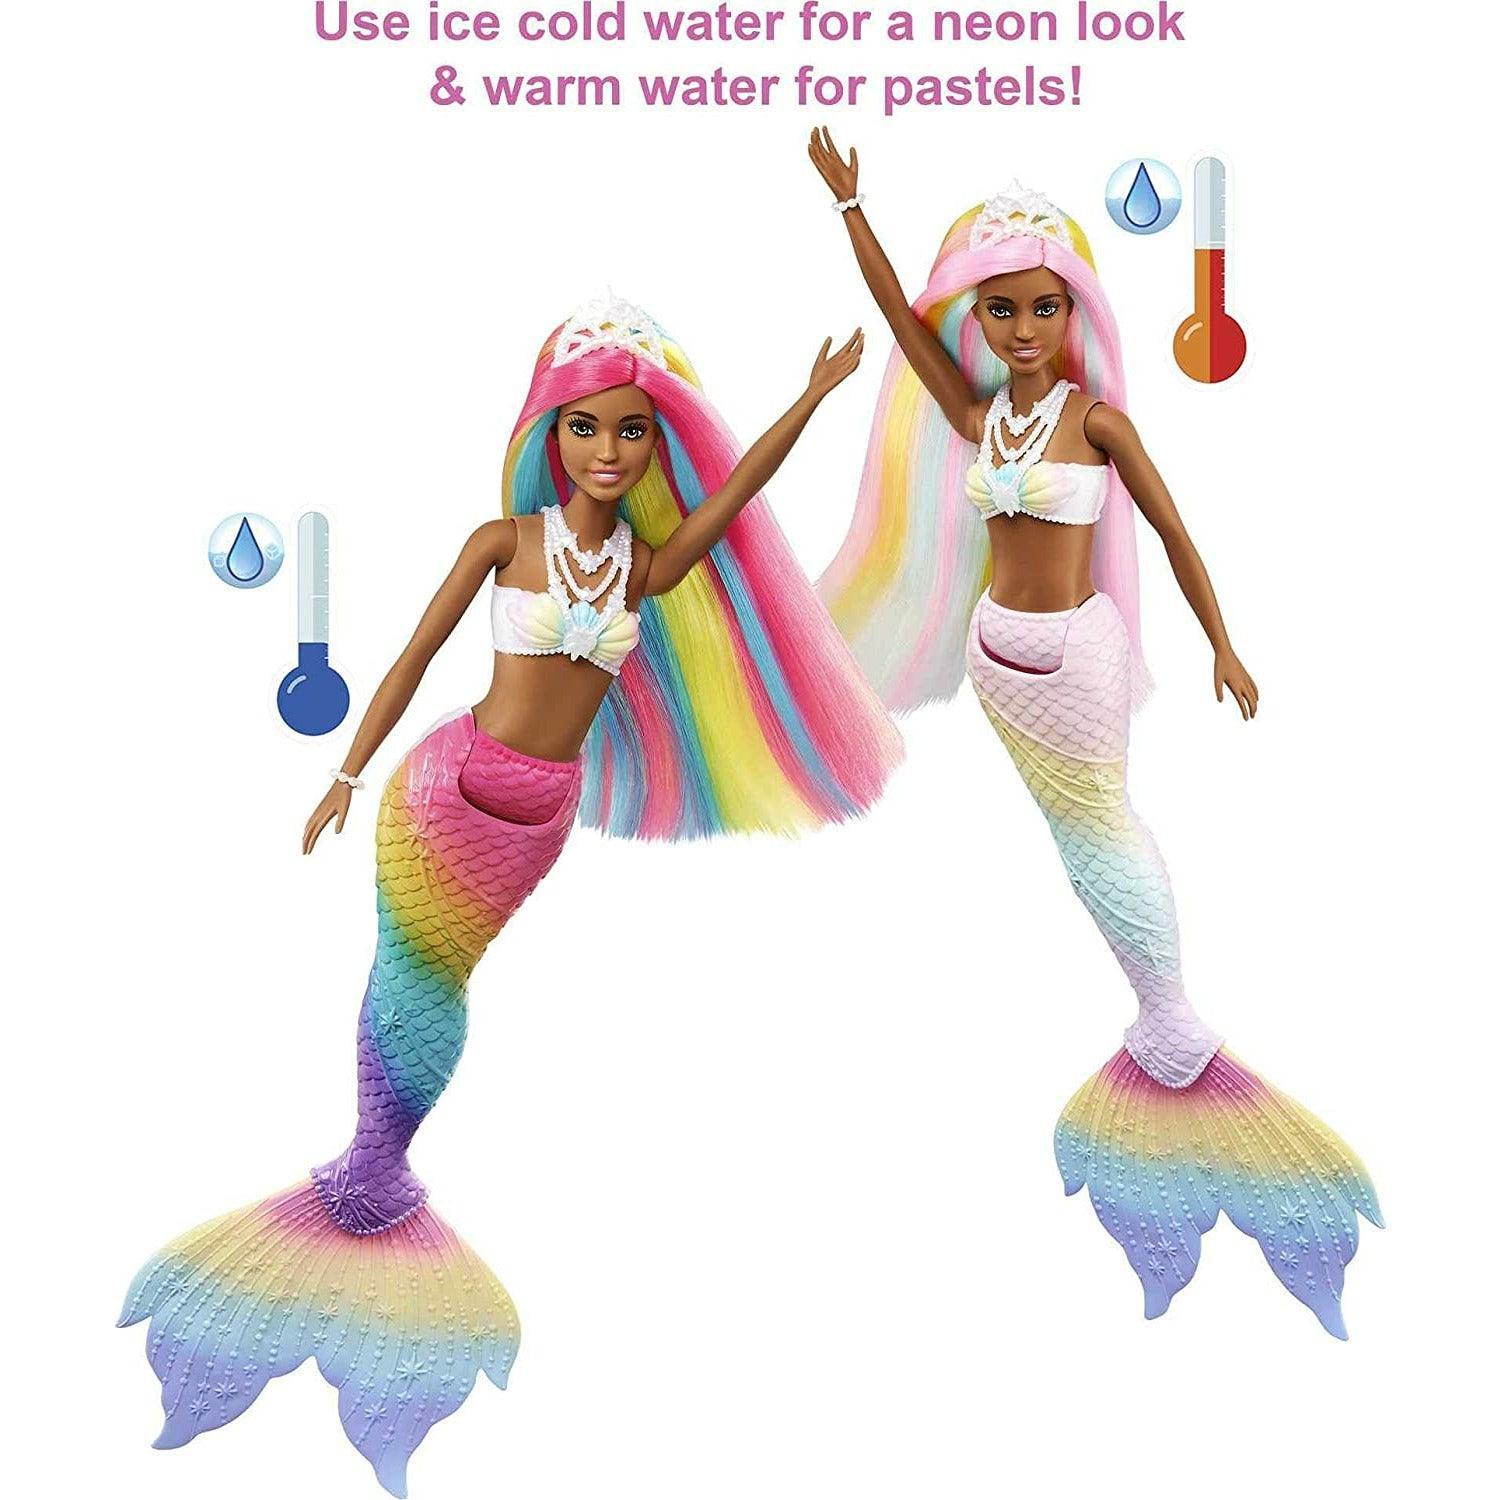 Barbie Dreamtopia Rainbow Magic Mermaid Doll with Rainbow Hair and Water-Activated Color Change Feature - BumbleToys - 5-7 Years, Barbie, Fashion Dolls & Accessories, Girls, Mermaid, Pre-Order